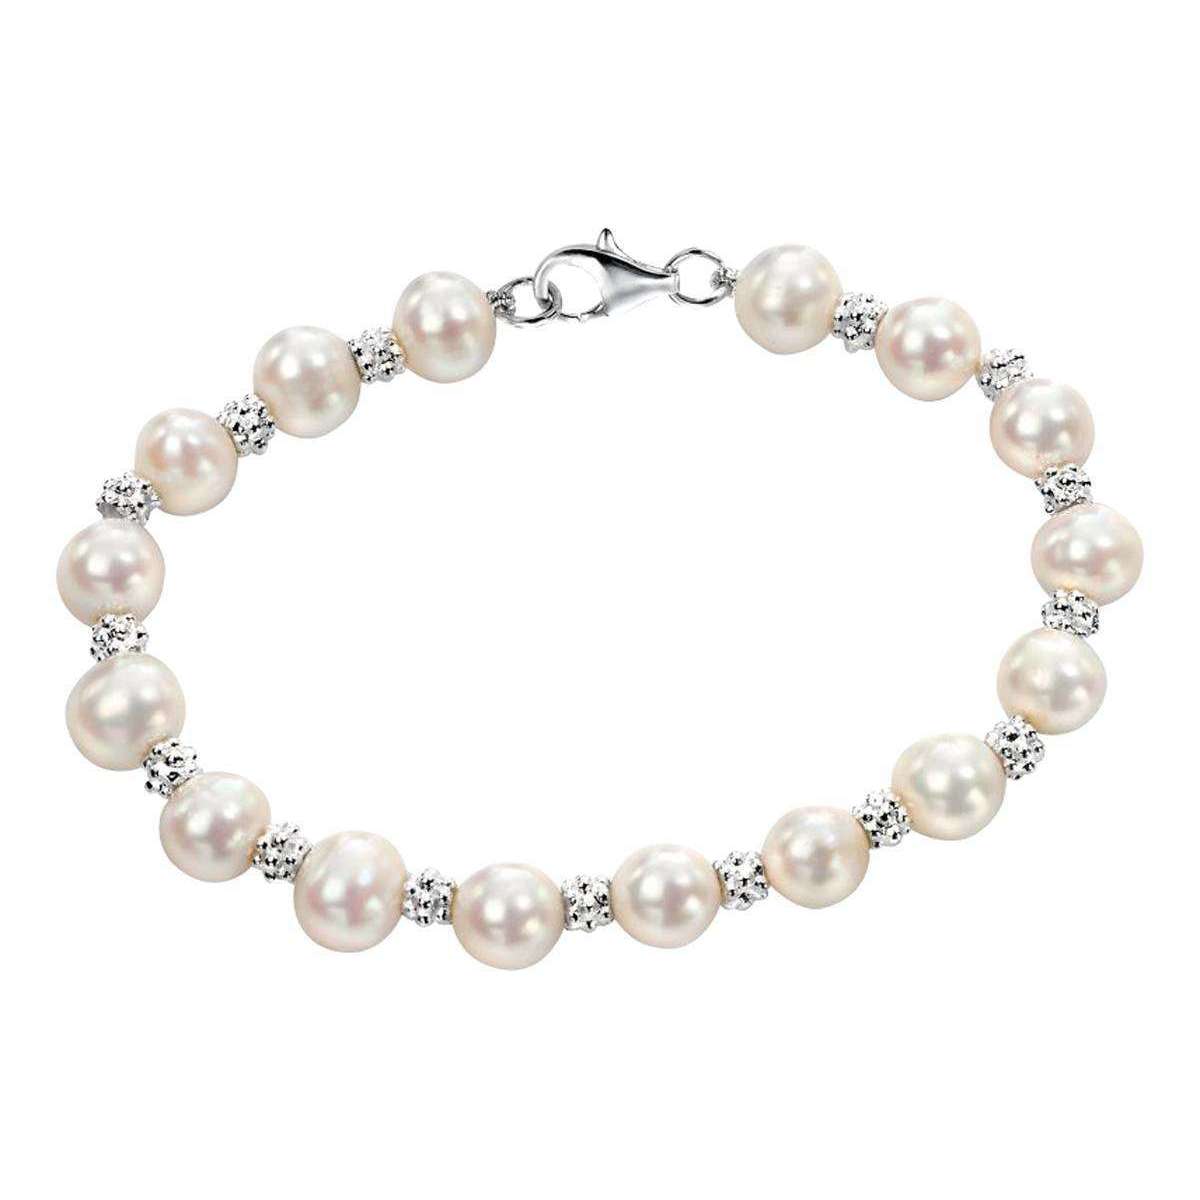 Elements Silver Freshwater Pearl Textured Bracelet - Silver/White